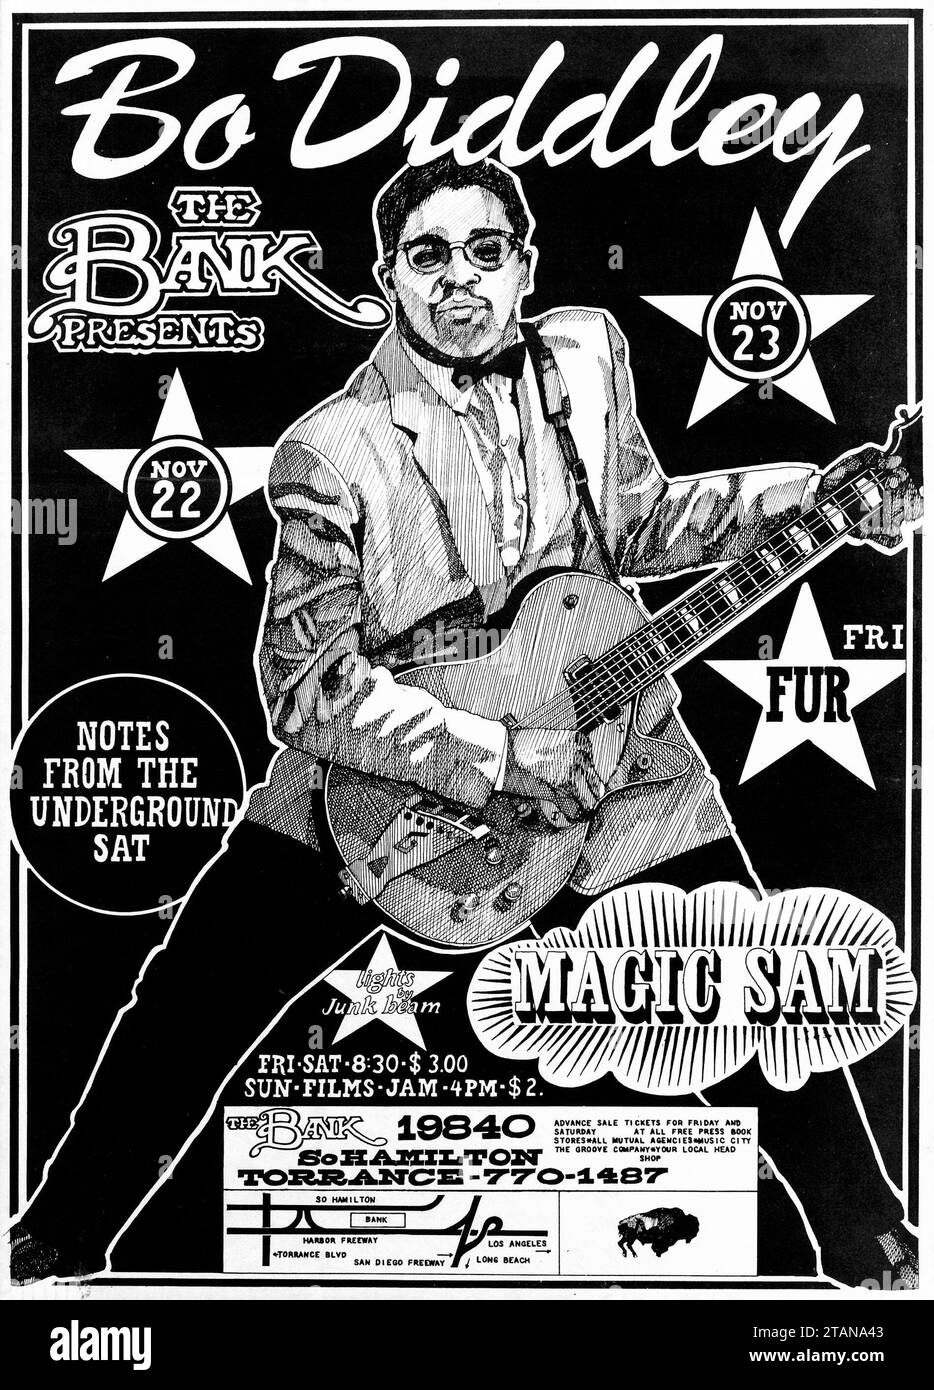 Bo Diddley - Notes from the Underground Sat - Torrance - affiche de concert (The Bank, 1968) Banque D'Images